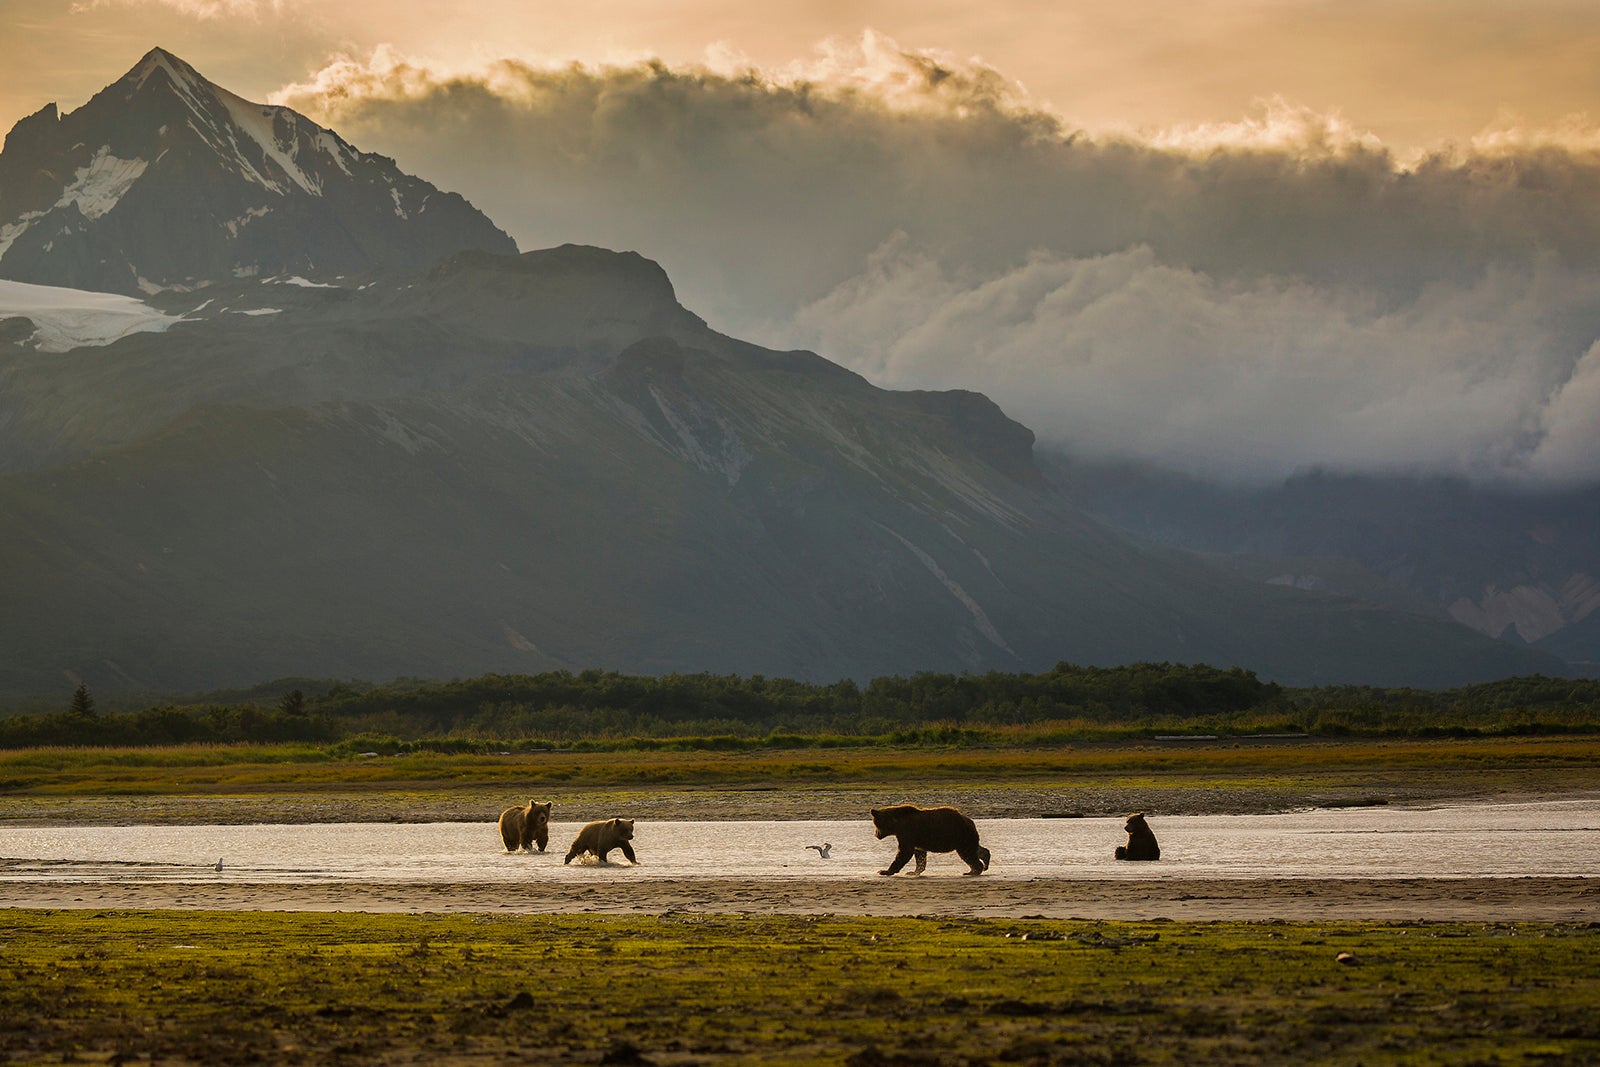 A group of brown bears wading in the water in front of mountains in Alaska